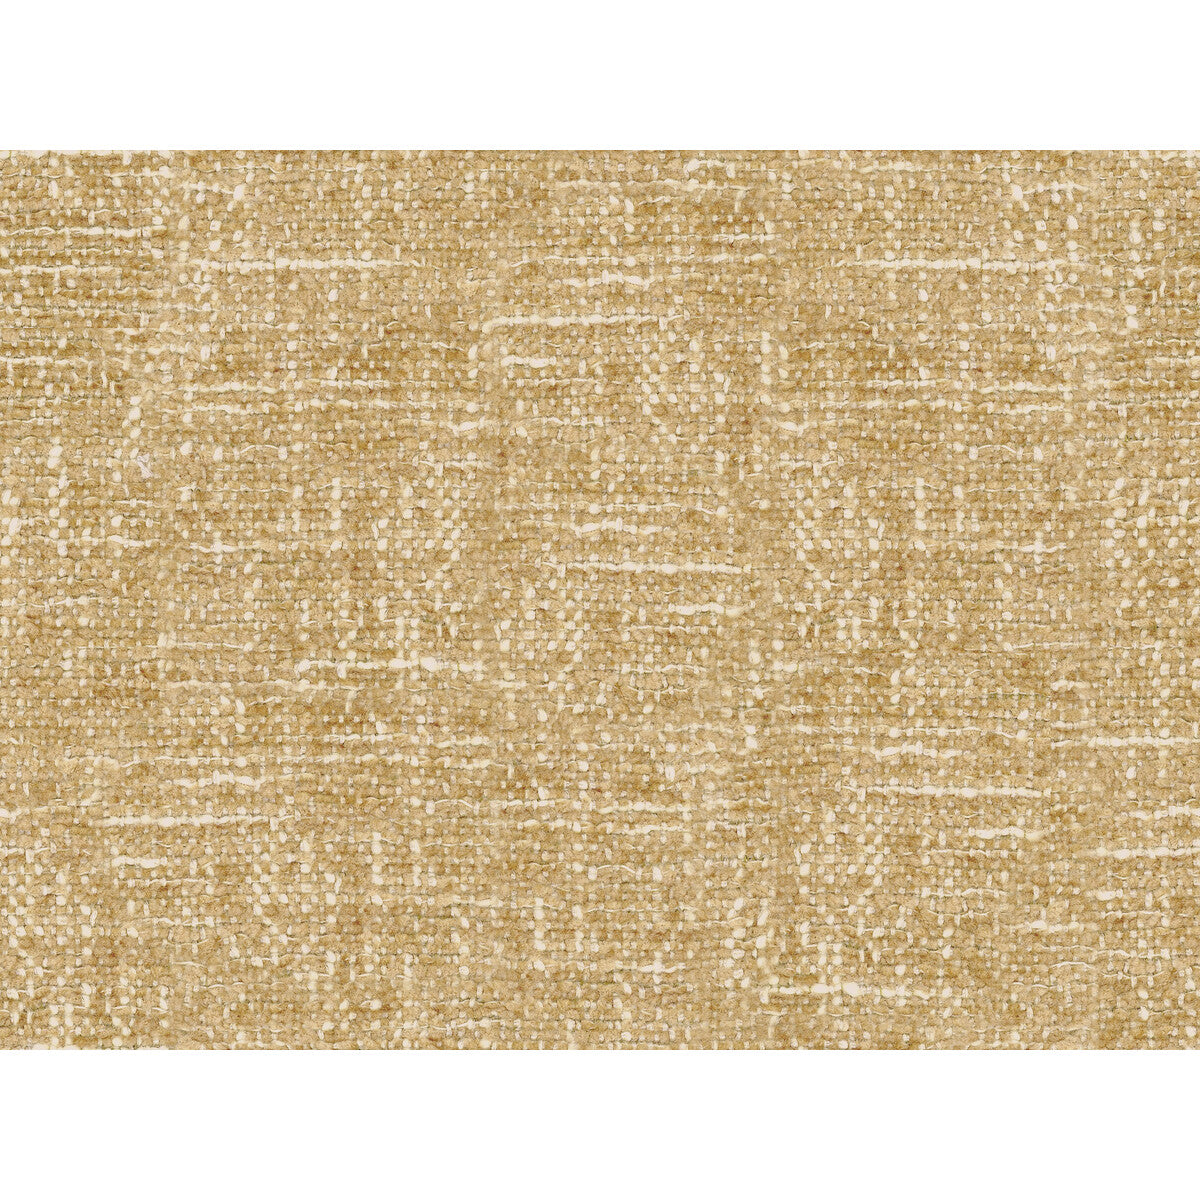 Tinge fabric in straw color - pattern GWF-3720.14.0 - by Lee Jofa Modern in the Kelly Wearstler Textures collection